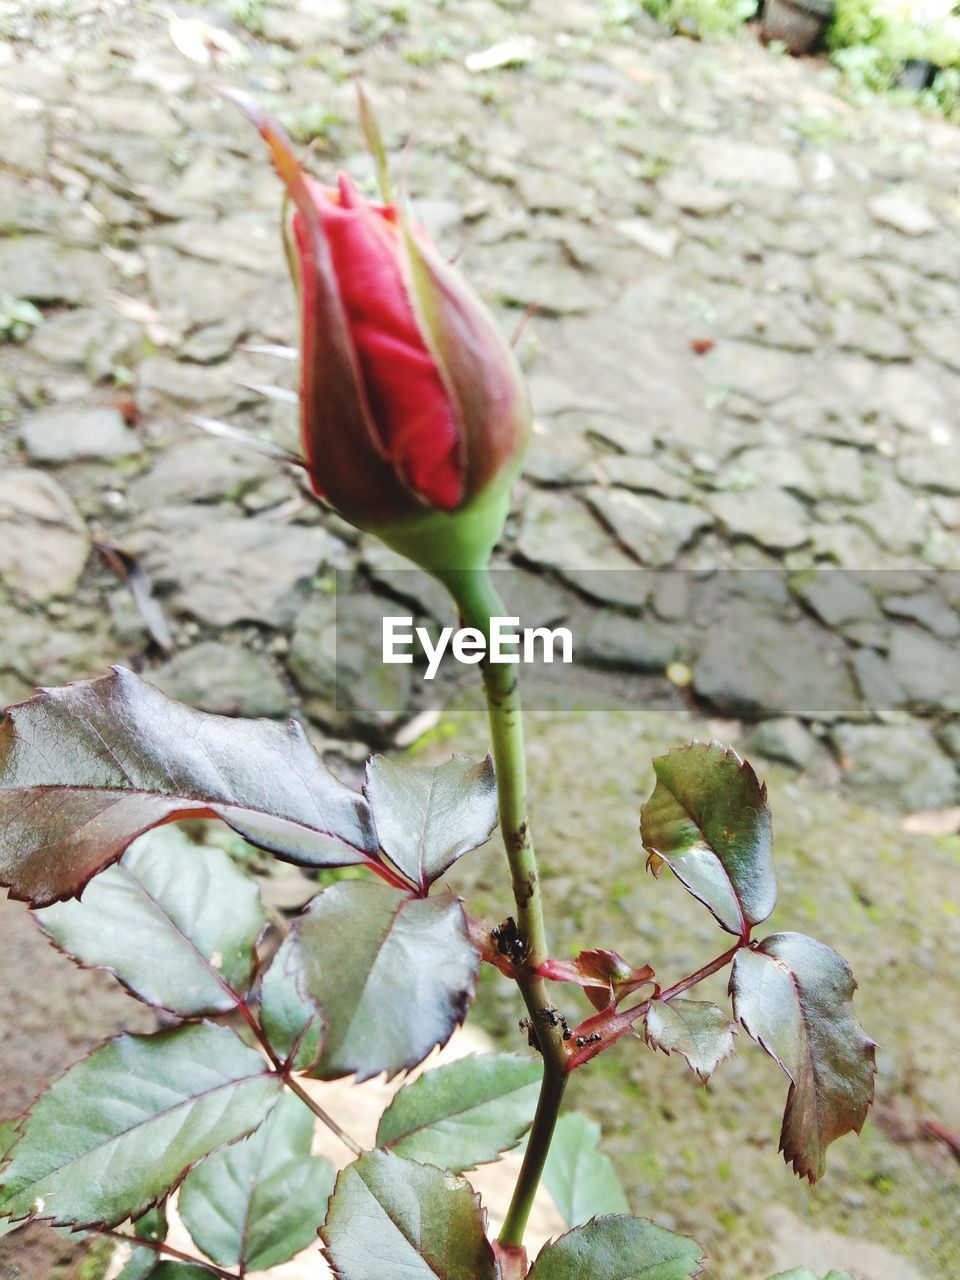 plant, flower, flowering plant, beauty in nature, leaf, growth, nature, plant part, freshness, close-up, no people, fragility, petal, day, focus on foreground, inflorescence, outdoors, bud, flower head, green, red, plant stem, pink, rose, botany, blossom